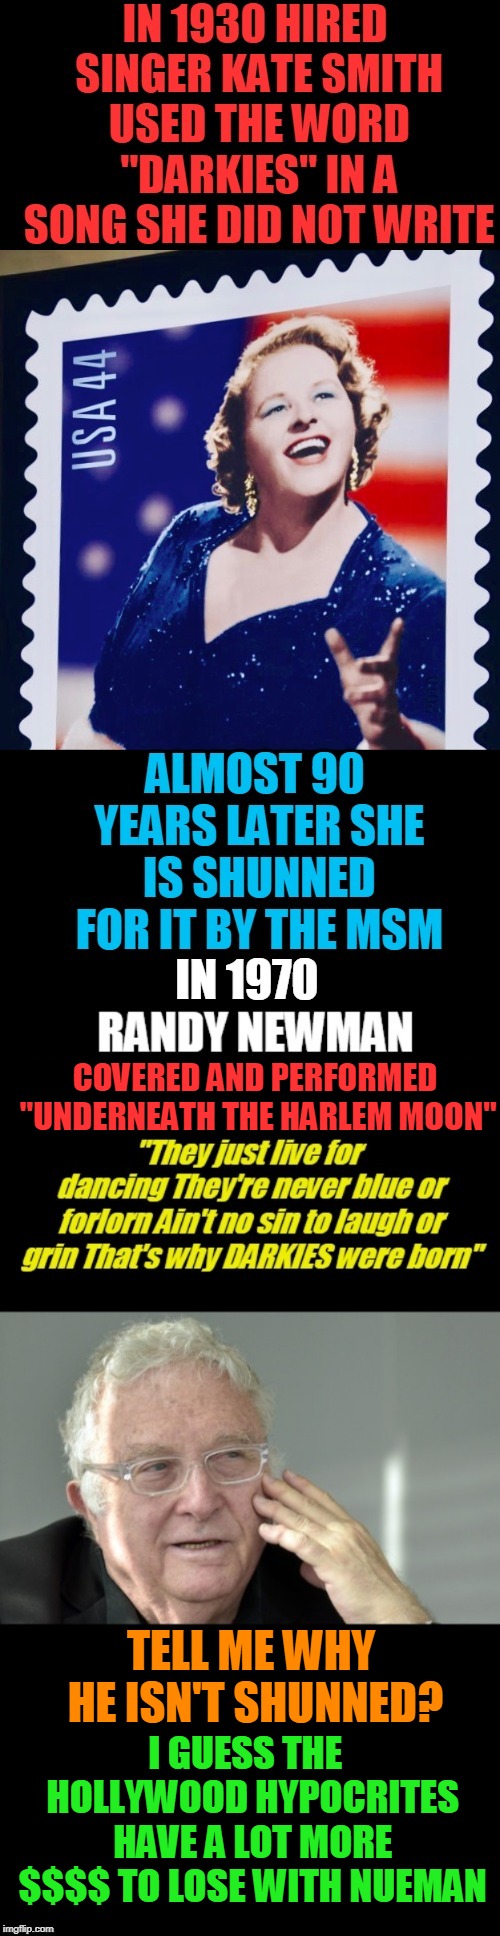 Hypocrisy | COVERED AND PERFORMED "UNDERNEATH THE HARLEM MOON"; TELL ME WHY HE ISN'T SHUNNED? I GUESS THE  HOLLYWOOD HYPOCRITES HAVE A LOT MORE $$$$ TO LOSE WITH NUEMAN | image tagged in hypocrissy,randy nueman,kate smith,politics,double standards | made w/ Imgflip meme maker